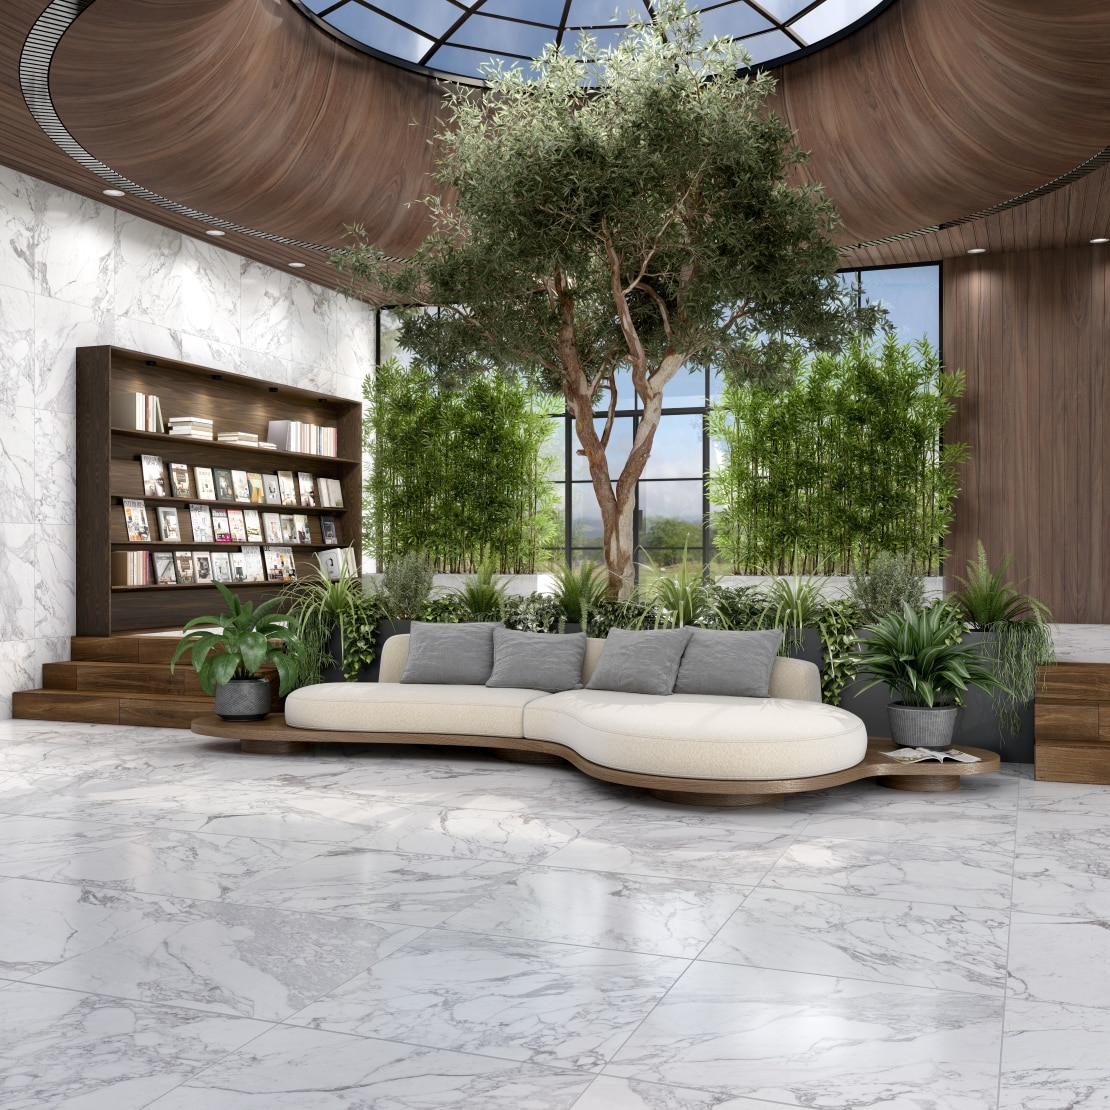 Luxurious lobby with trees and arched ceilings